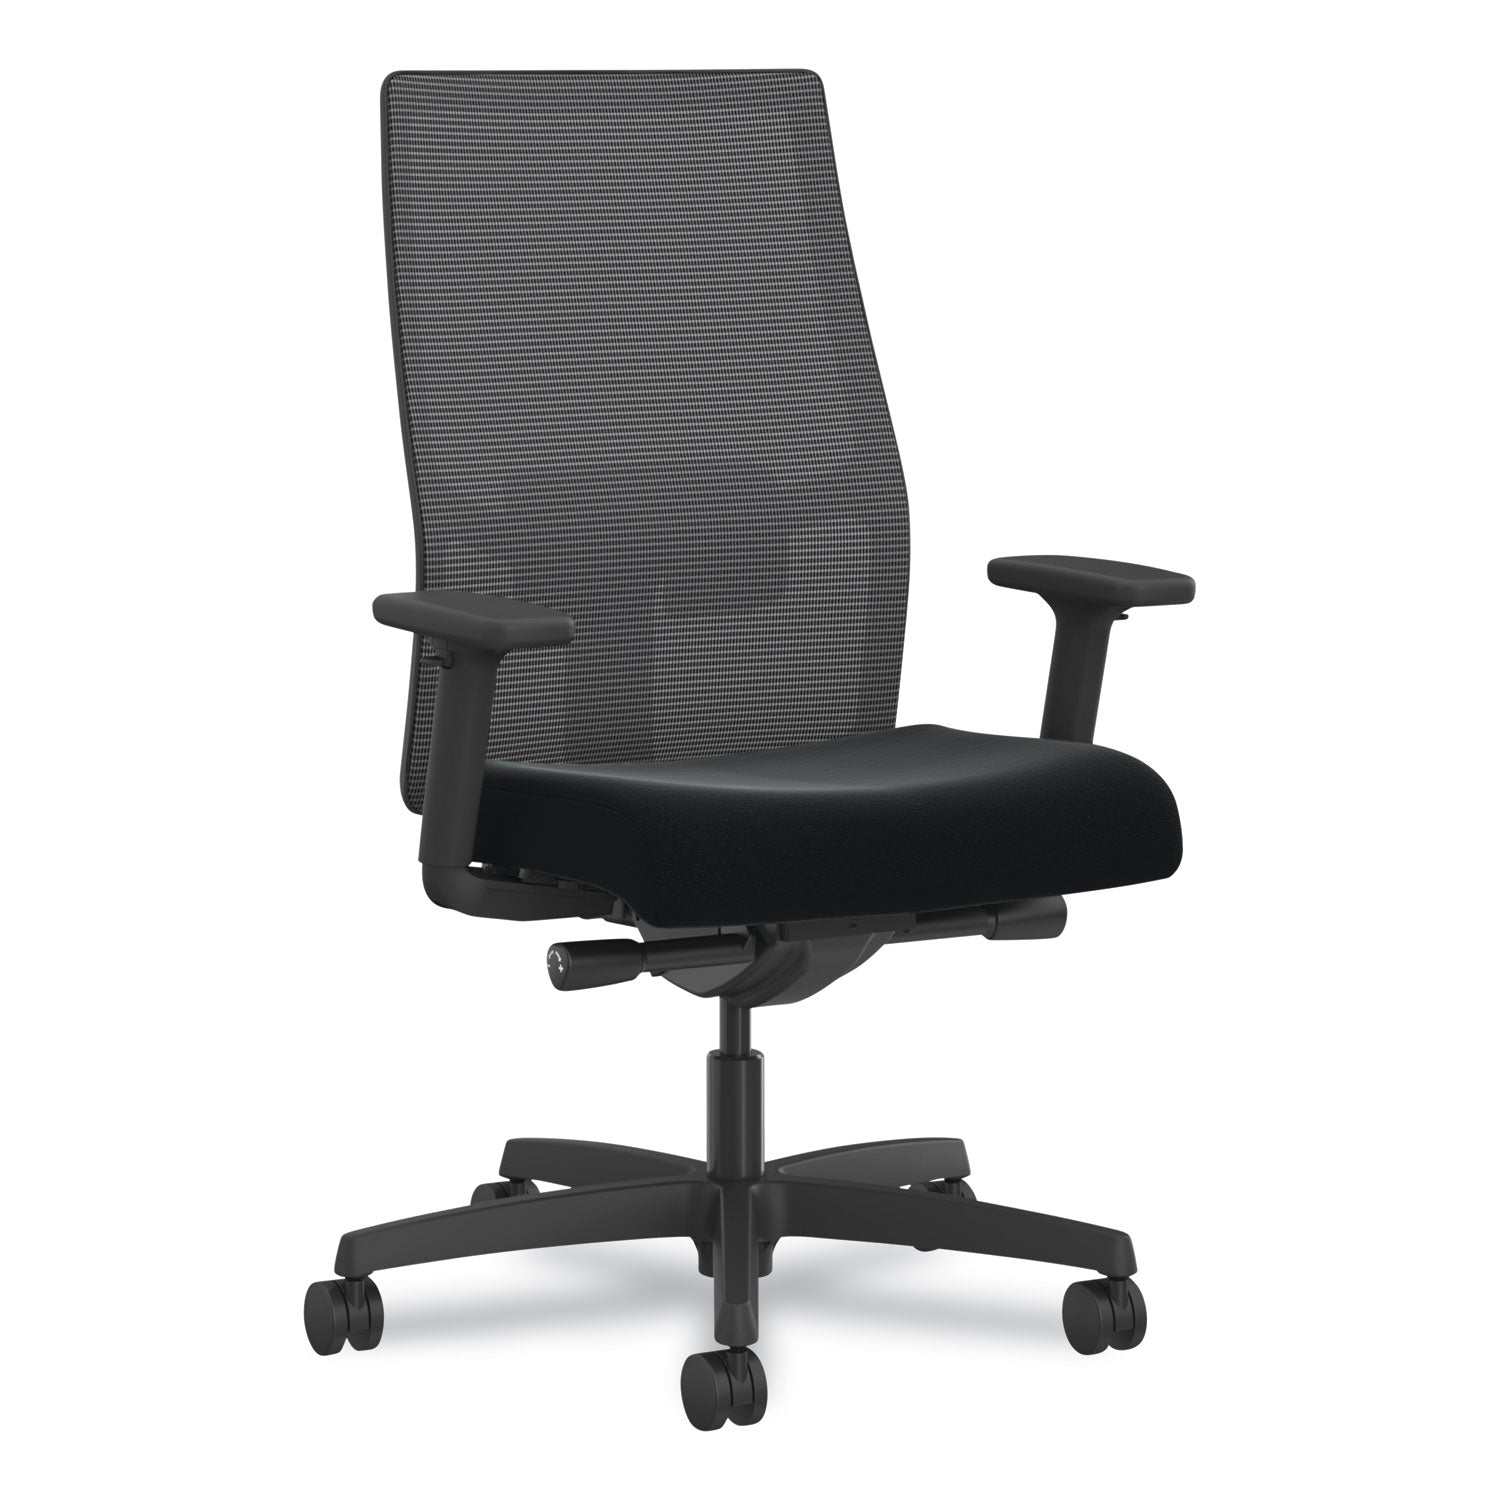 ignition-20-4-way-stretch-mid-back-mesh-task-chair-navy-blue-adjustable-lumbar-support-black-ships-in-7-10-business-days_honi2mm2amc10et - 1